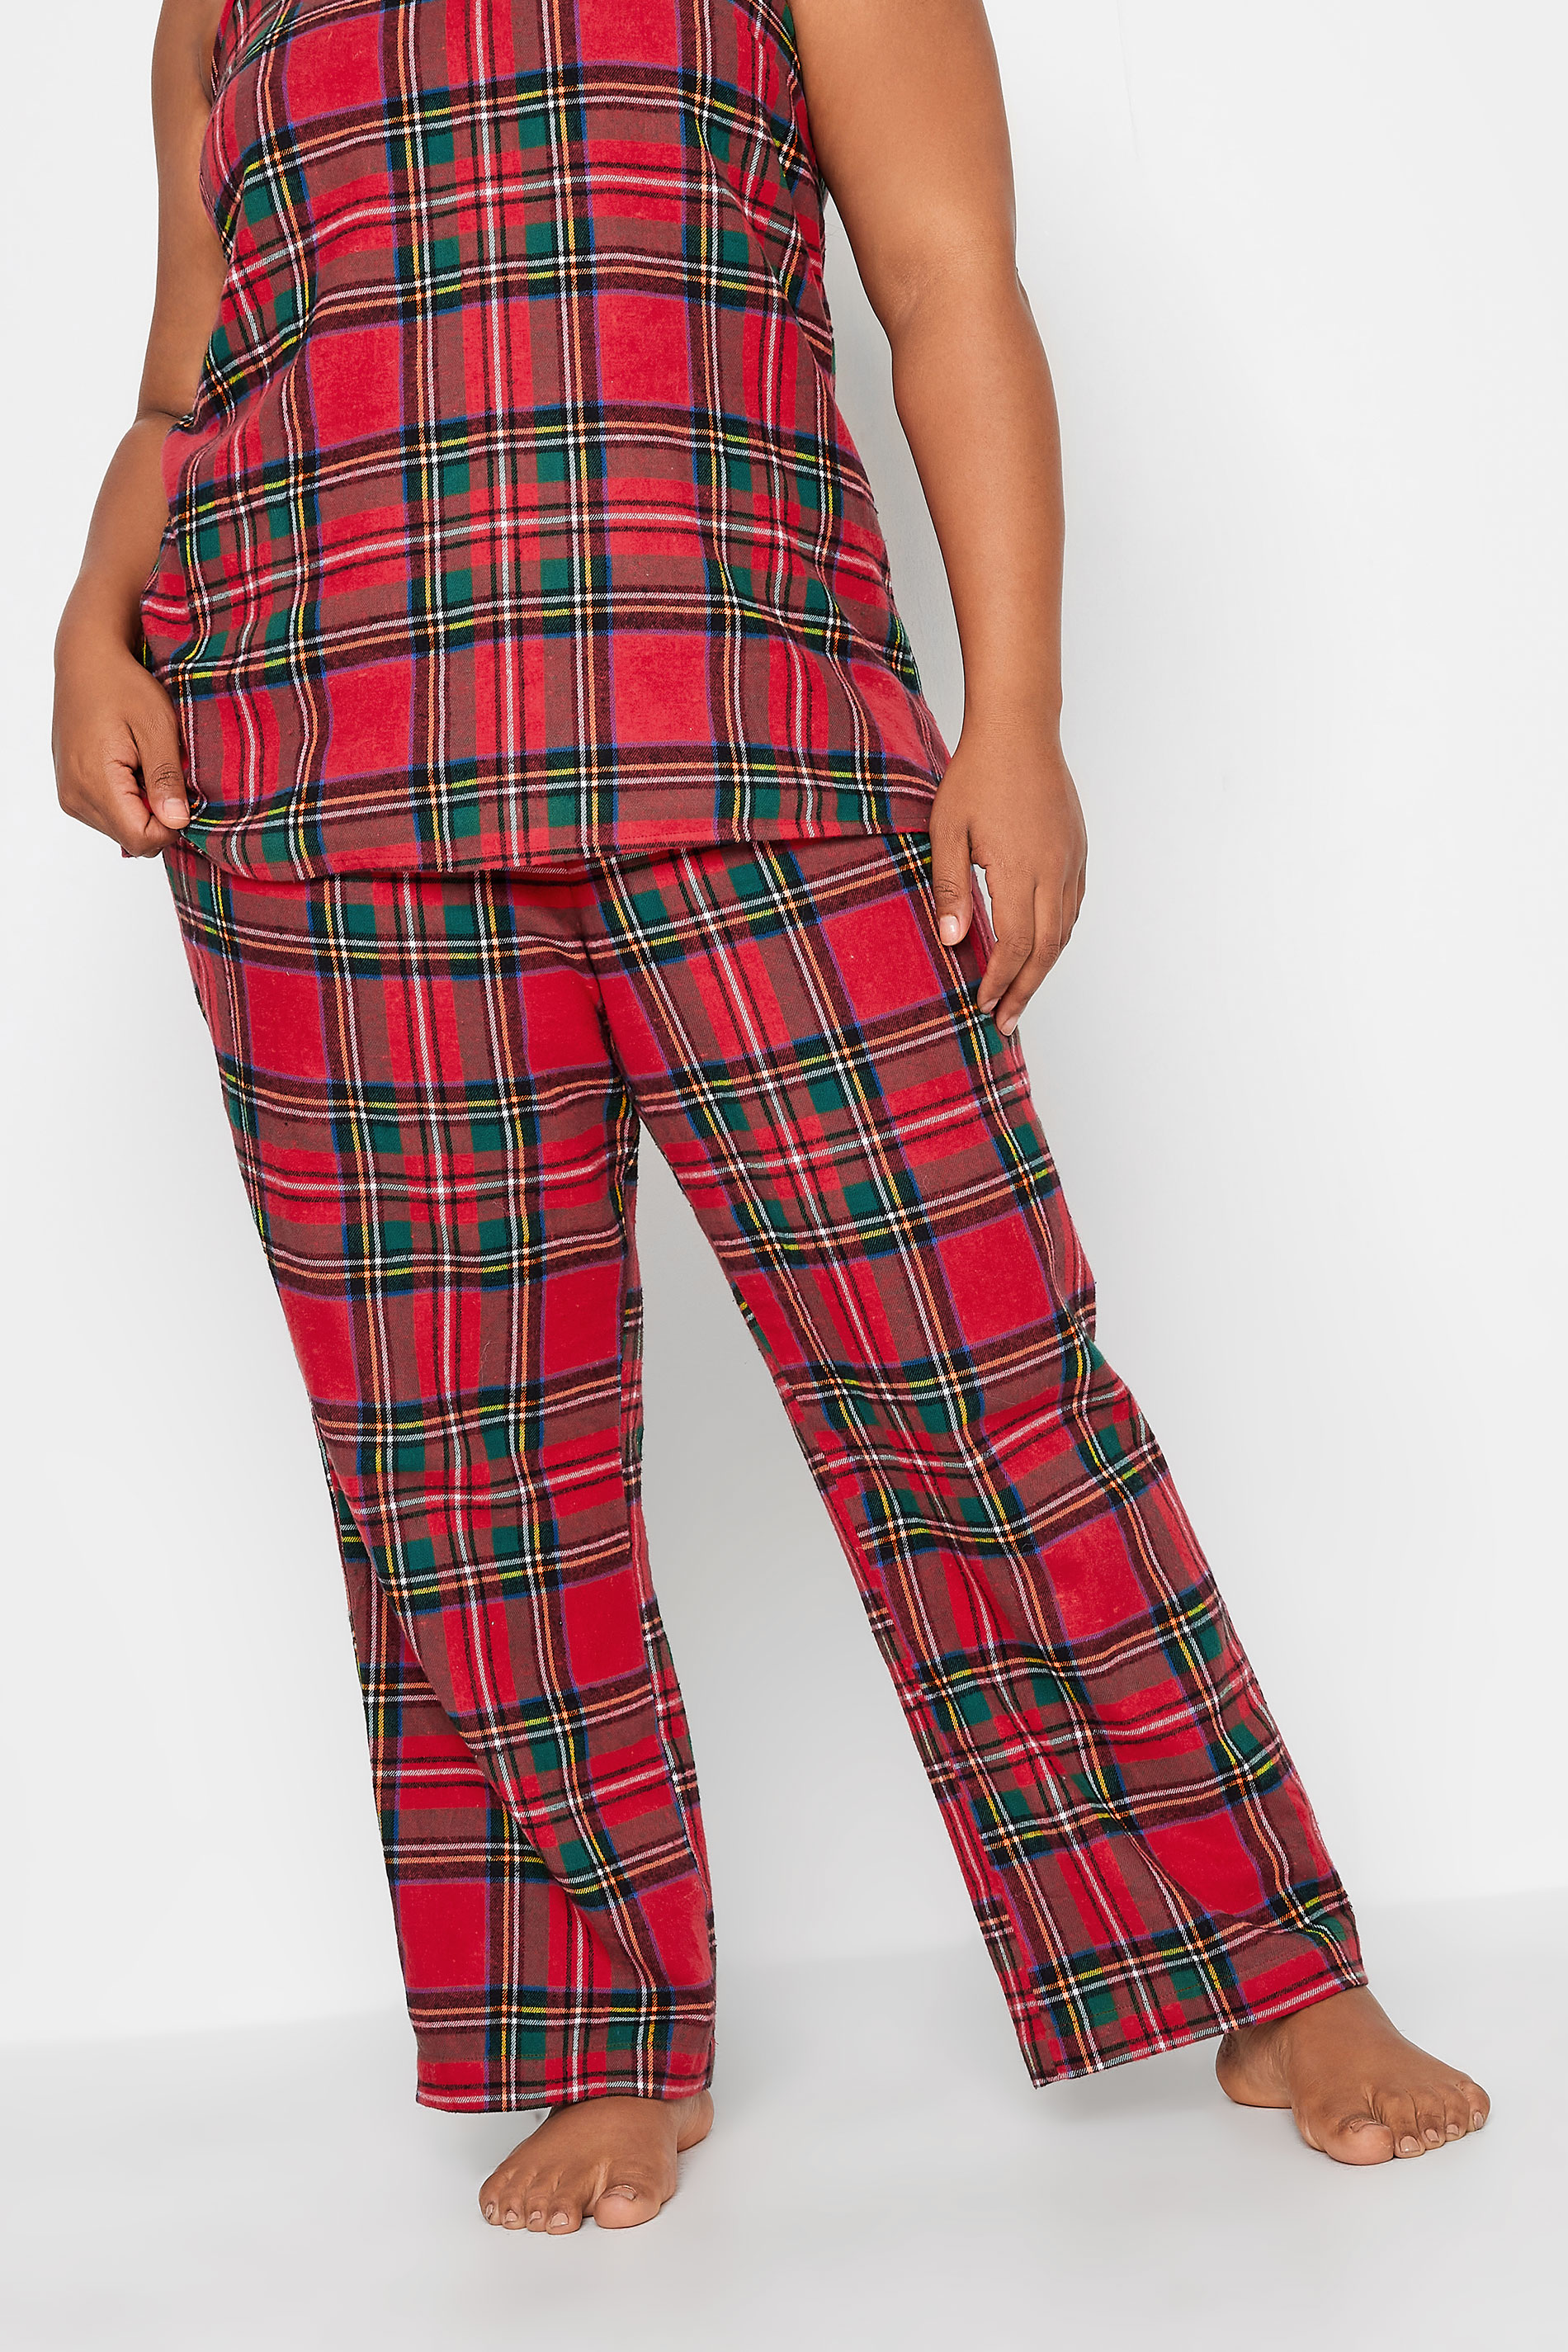 LIMITED COLLECTION Plus Size Red Tartan Check Pyjama Bottoms | Yours Clothing 2